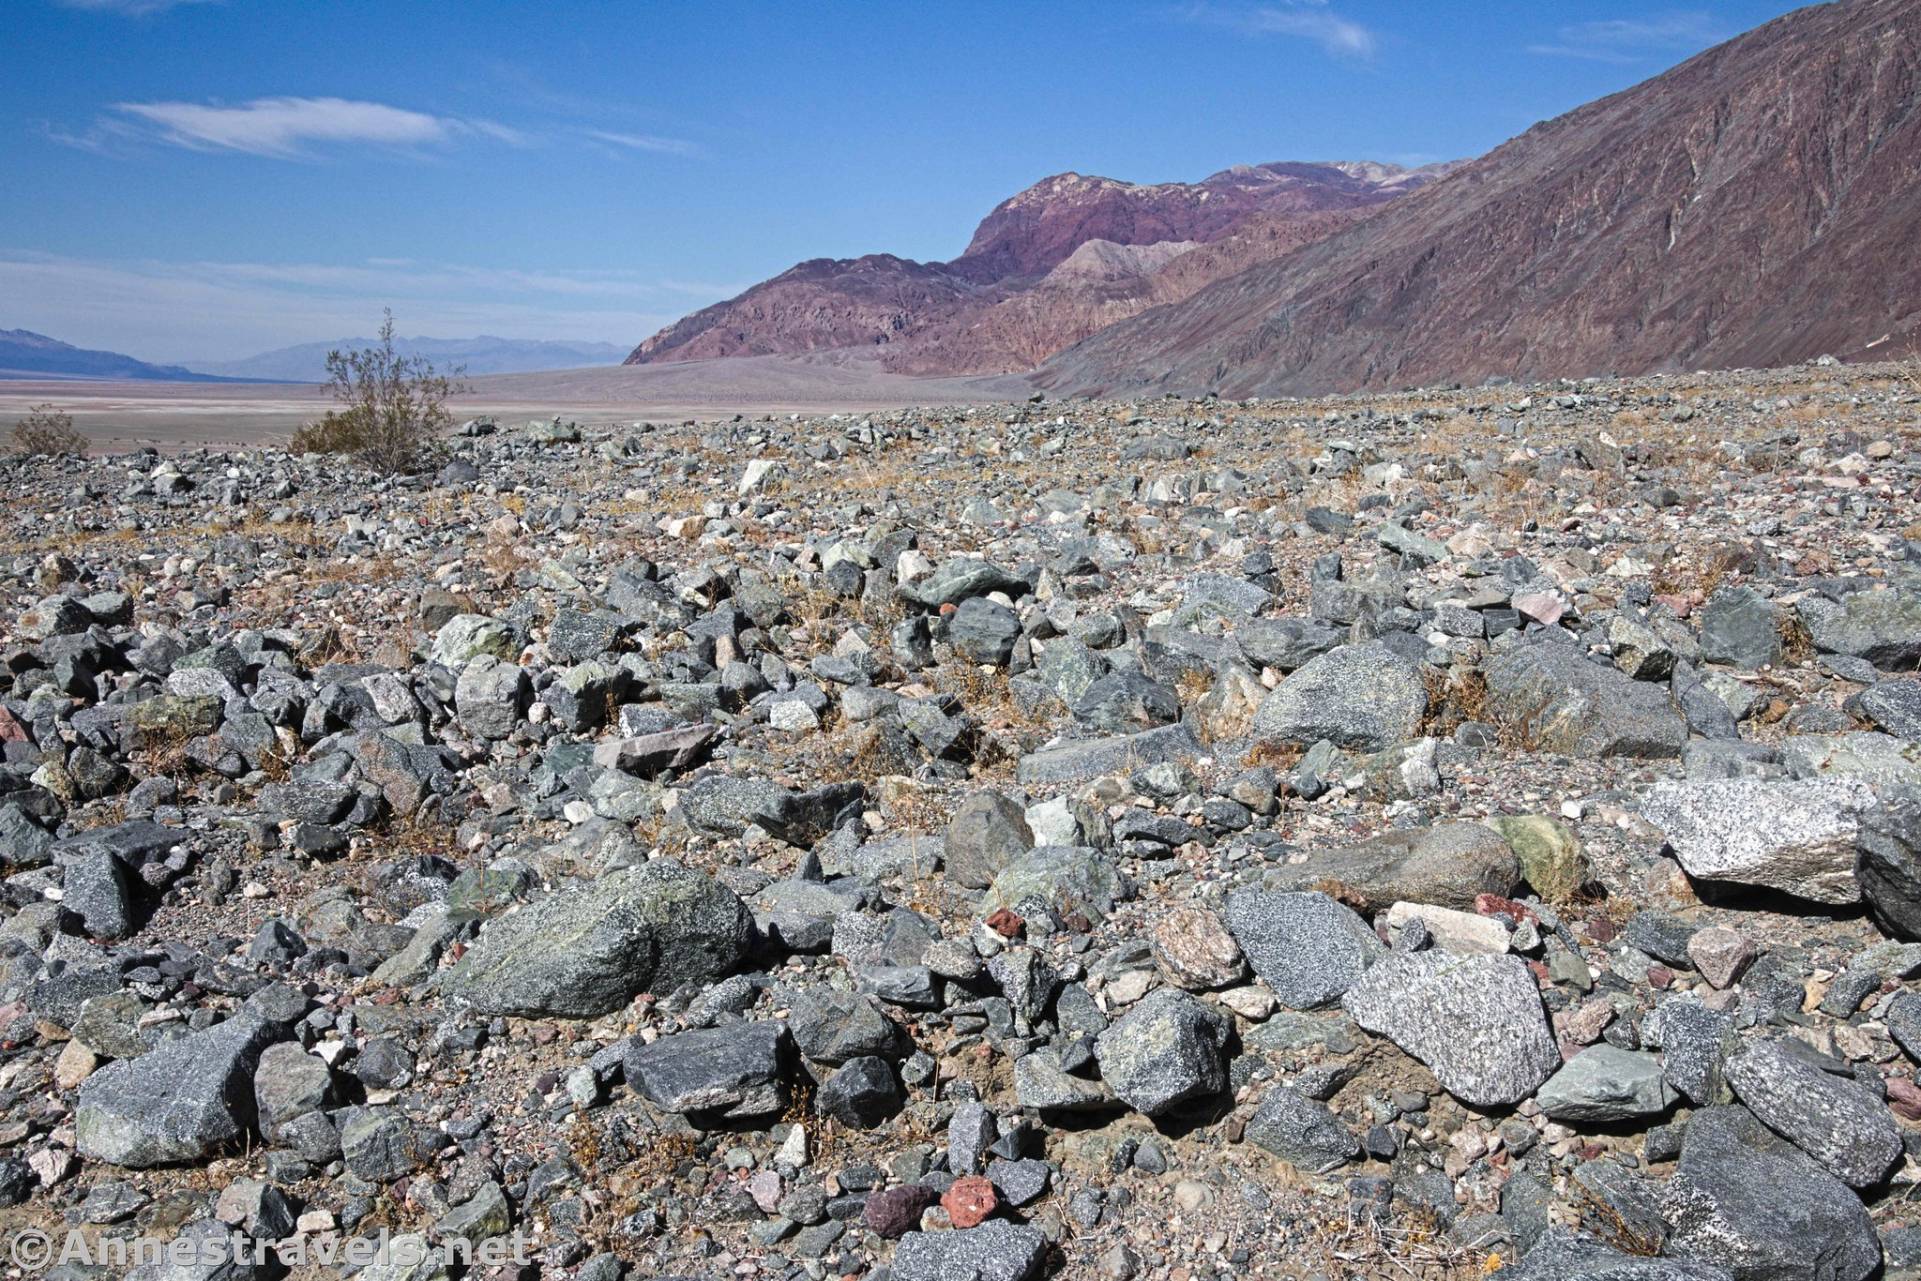 Rocks at the mouth of Willow Canyon, Death Valley National Park, California